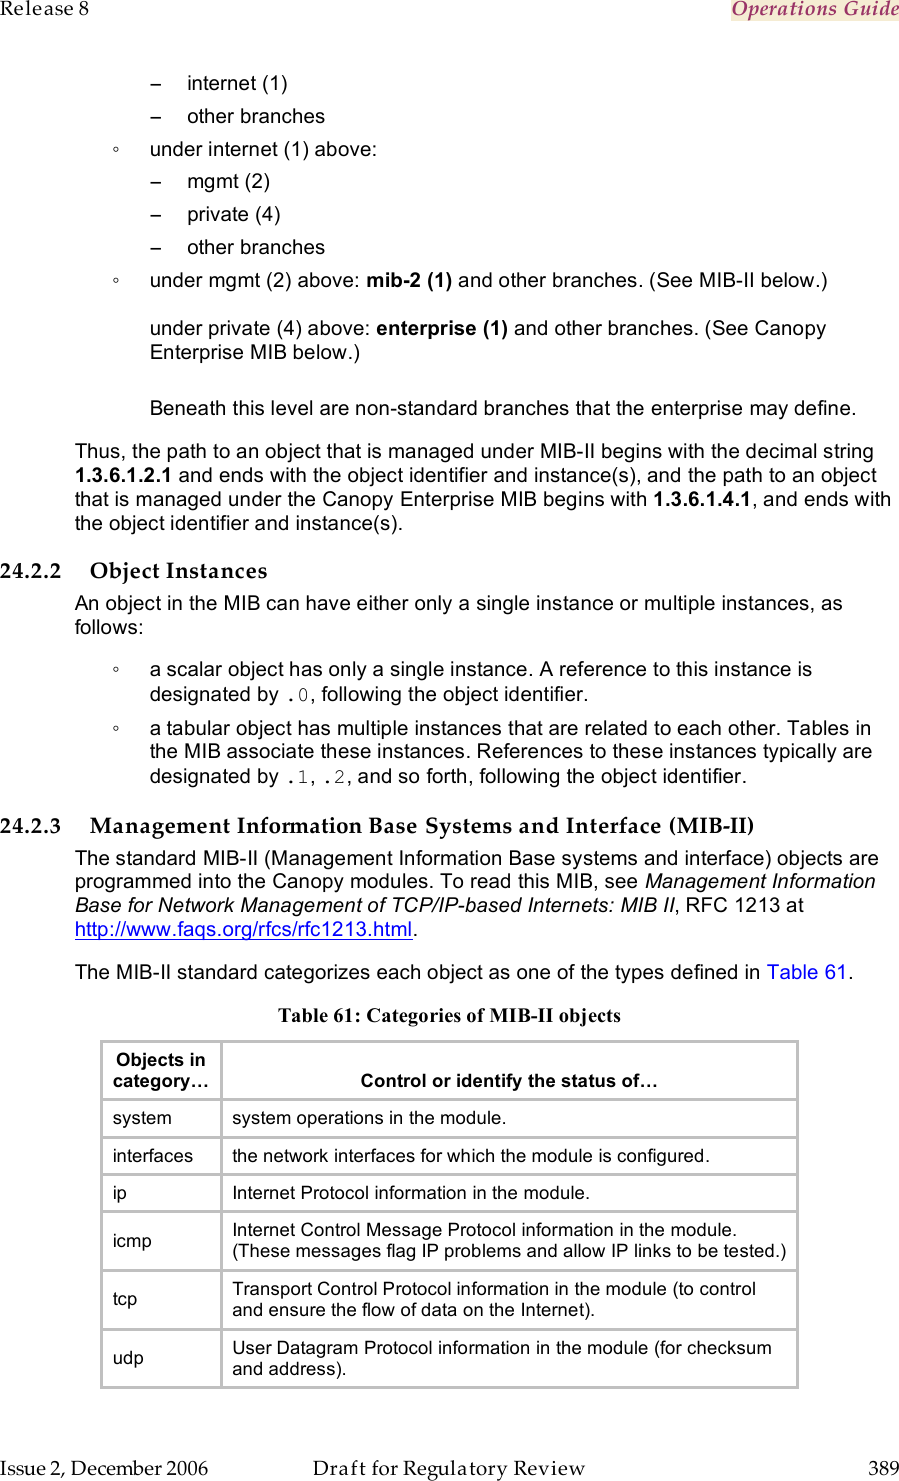 Release 8    Operations Guide   Issue 2, December 2006  Draft for Regulatory Review  389     −  internet (1) −  other branches ◦  under internet (1) above: −  mgmt (2) −  private (4) −  other branches ◦  under mgmt (2) above: mib-2 (1) and other branches. (See MIB-II below.)  under private (4) above: enterprise (1) and other branches. (See Canopy Enterprise MIB below.)  Beneath this level are non-standard branches that the enterprise may define. Thus, the path to an object that is managed under MIB-II begins with the decimal string 1.3.6.1.2.1 and ends with the object identifier and instance(s), and the path to an object that is managed under the Canopy Enterprise MIB begins with 1.3.6.1.4.1, and ends with the object identifier and instance(s). 24.2.2 Object Instances An object in the MIB can have either only a single instance or multiple instances, as follows: ◦  a scalar object has only a single instance. A reference to this instance is designated by .0, following the object identifier. ◦  a tabular object has multiple instances that are related to each other. Tables in the MIB associate these instances. References to these instances typically are designated by .1, .2, and so forth, following the object identifier. 24.2.3 Management Information Base Systems and Interface (MIB-II) The standard MIB-II (Management Information Base systems and interface) objects are programmed into the Canopy modules. To read this MIB, see Management Information Base for Network Management of TCP/IP-based Internets: MIB II, RFC 1213 at http://www.faqs.org/rfcs/rfc1213.html. The MIB-II standard categorizes each object as one of the types defined in Table 61. Table 61: Categories of MIB-II objects Objects in category…  Control or identify the status of… system system operations in the module. interfaces the network interfaces for which the module is configured. ip Internet Protocol information in the module. icmp Internet Control Message Protocol information in the module. (These messages flag IP problems and allow IP links to be tested.) tcp Transport Control Protocol information in the module (to control and ensure the flow of data on the Internet). udp User Datagram Protocol information in the module (for checksum and address). 